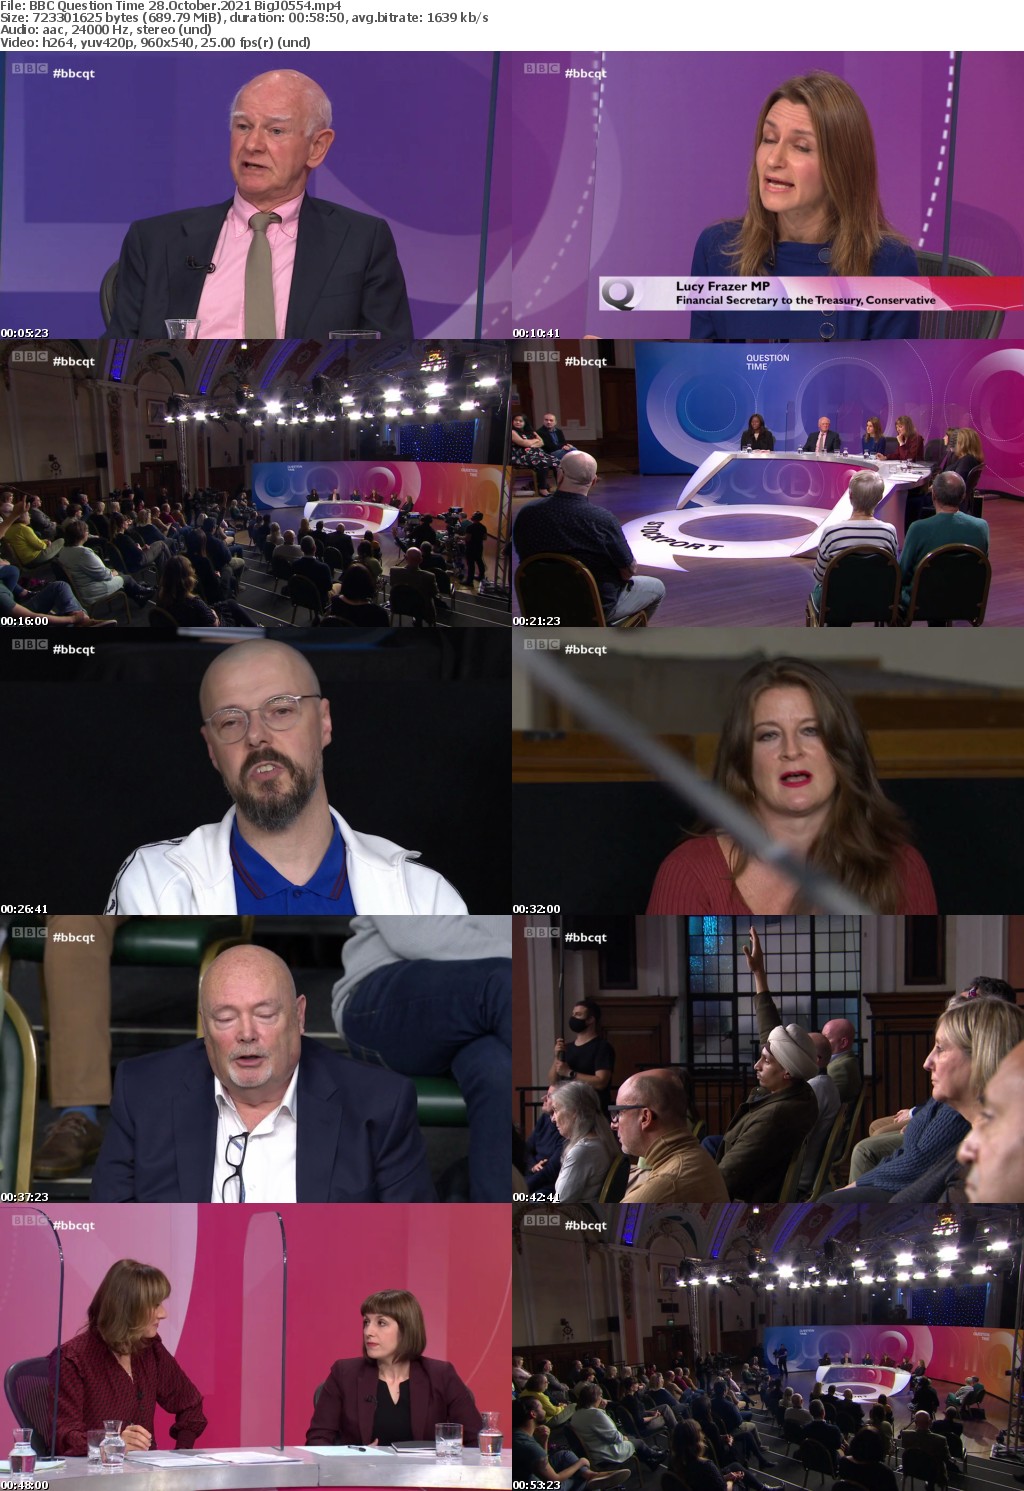 BBC Question Time 28 October 2021 MP4 + subs BigJ0554